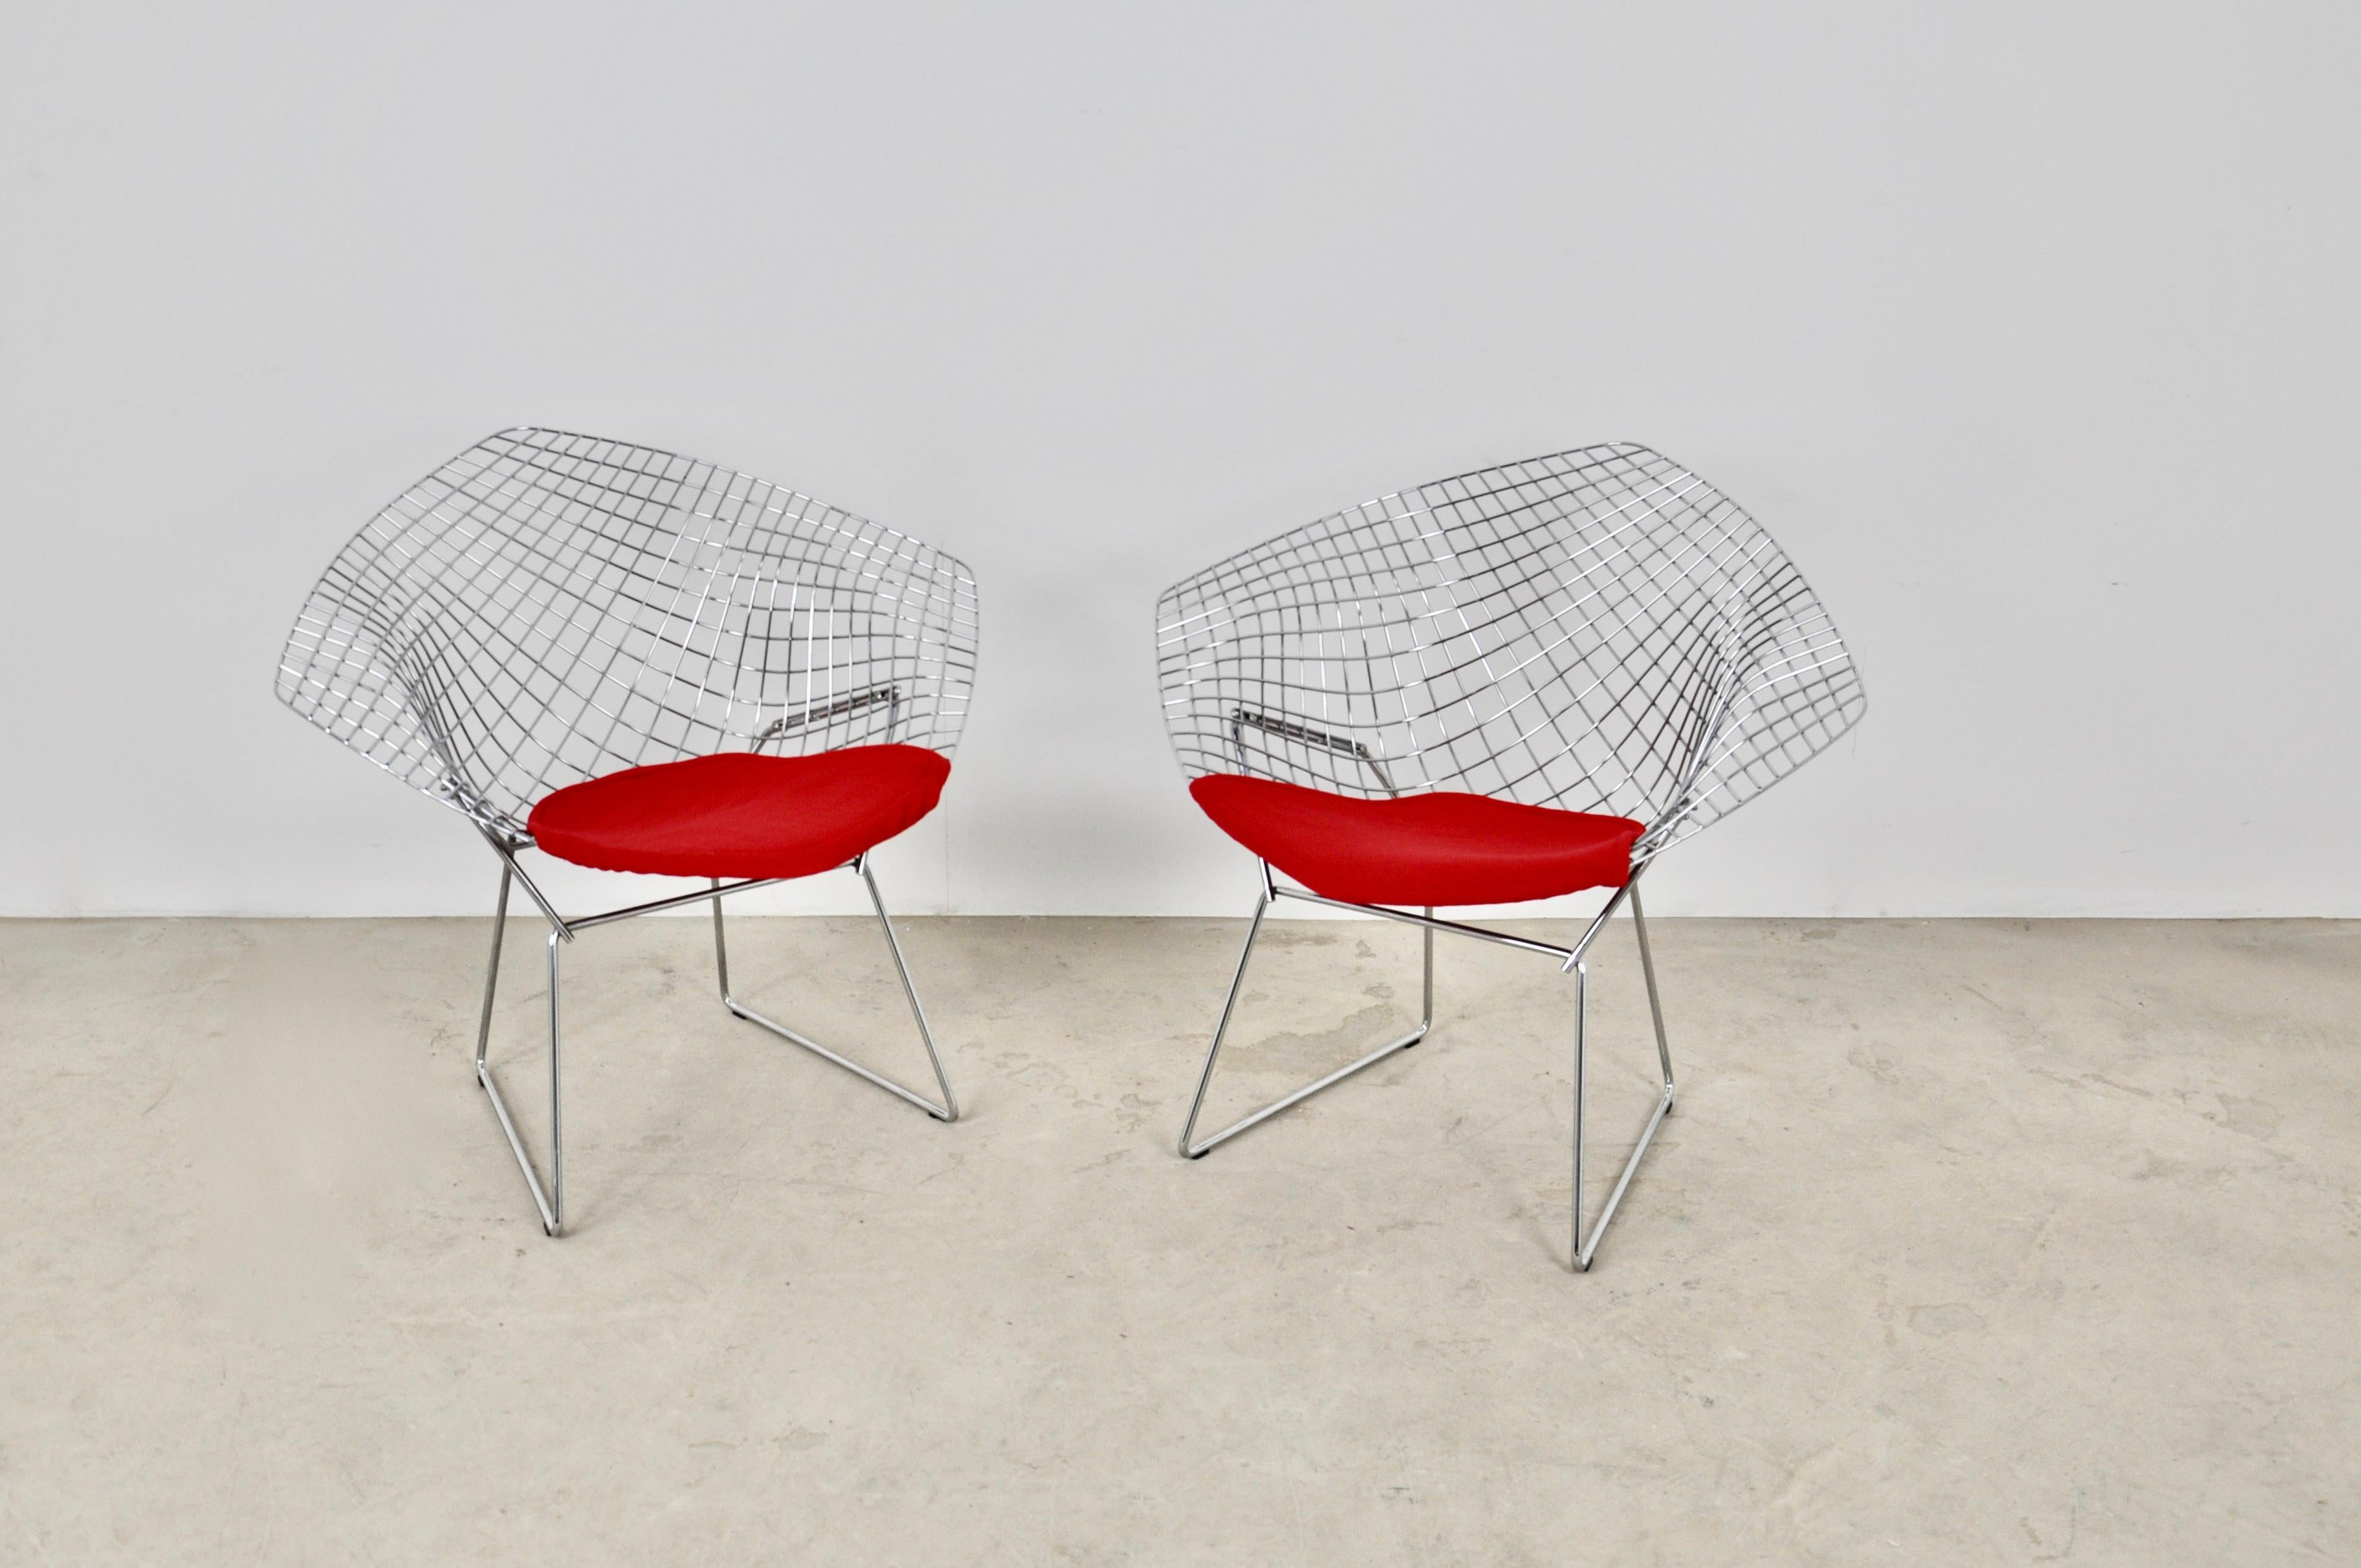 Pair of armchairs in chromed metal and red fabric. Wear due to time and age of the armchairs.